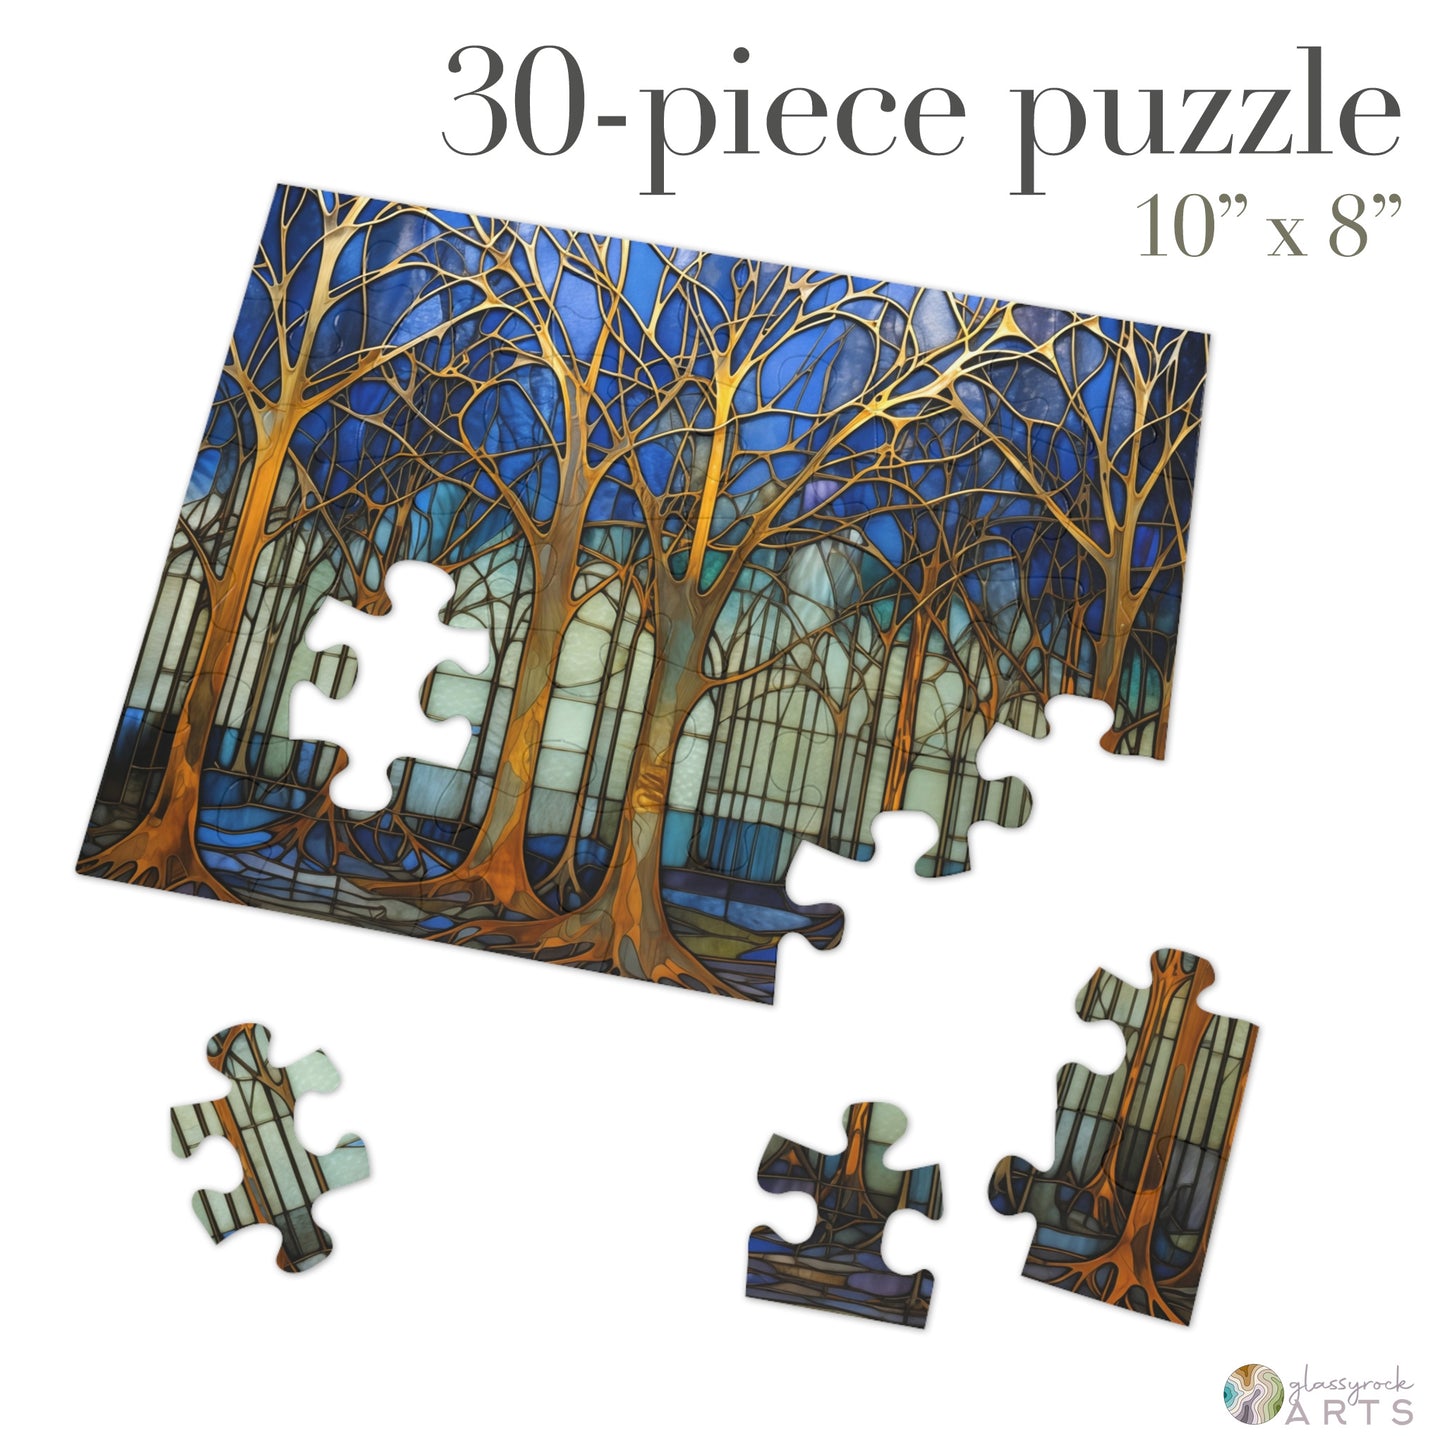 Stained Glass Forest Jigsaw Puzzle, Blue and Gold